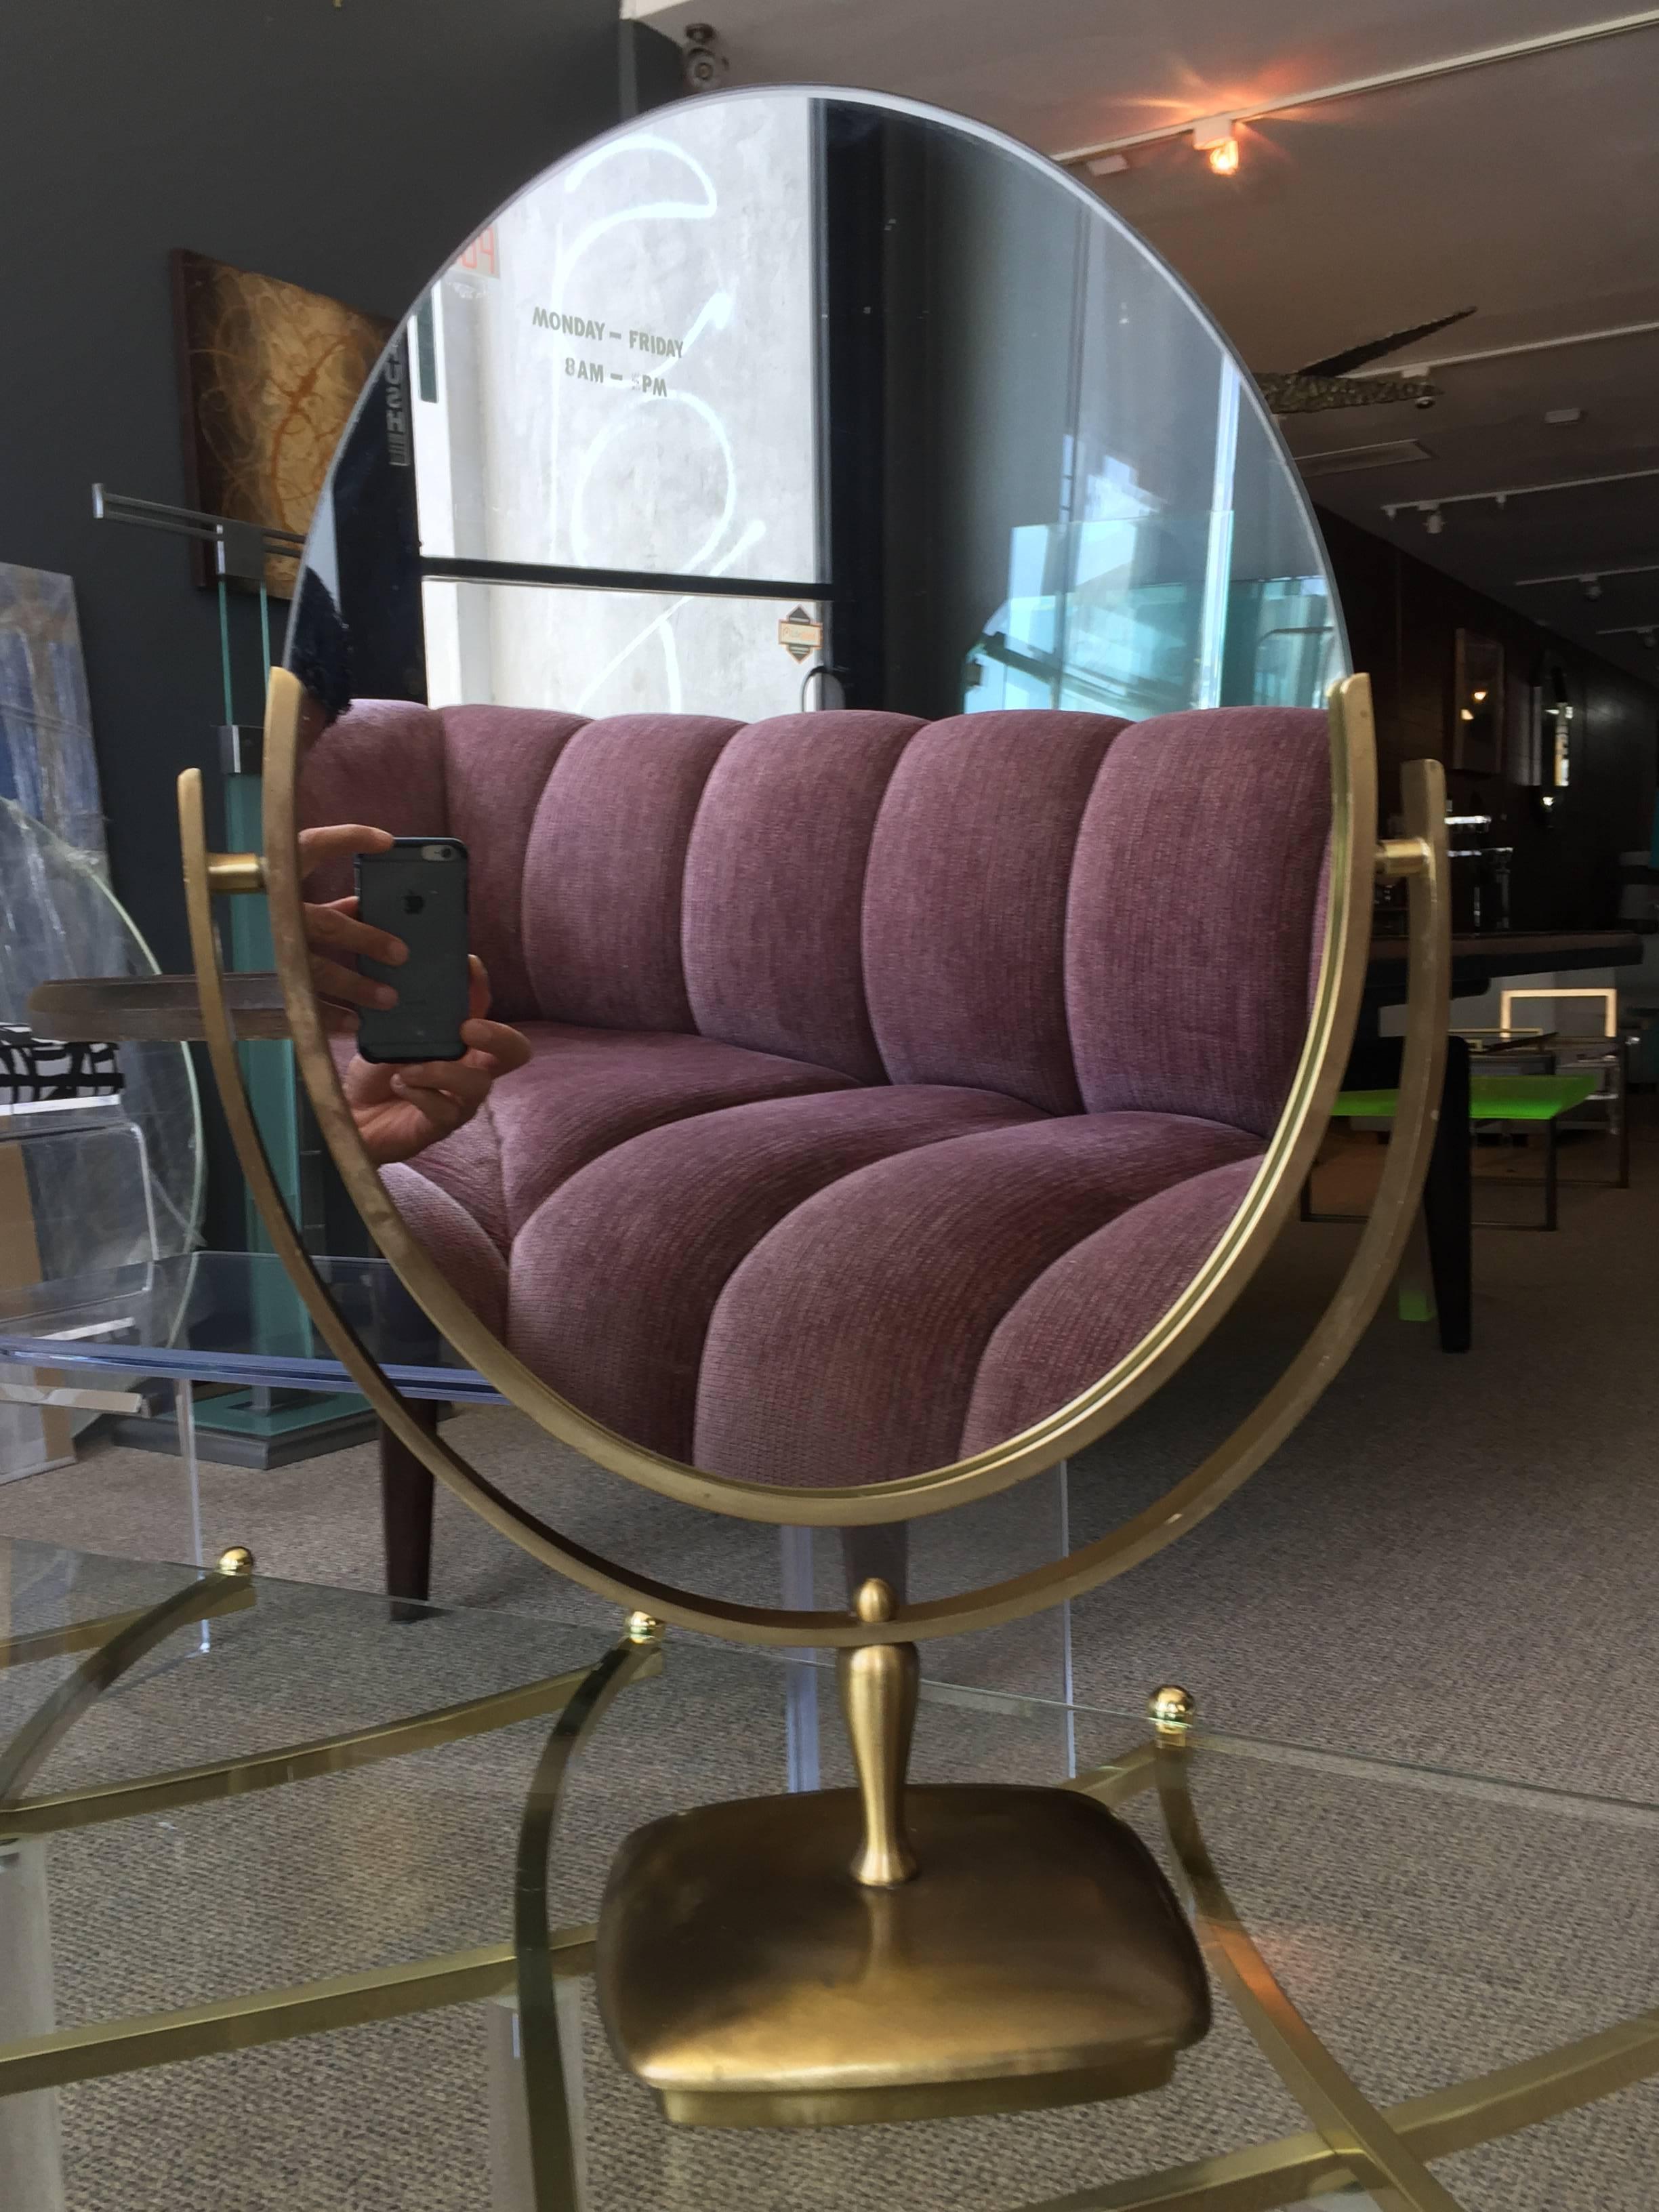 Large and beautiful oval mirror designed and manufactured by Charles Hollis Jones in the 1960s.
The mirror has an antique brass finished frame and base, the mirror is double sided and it can be flipped to be used on either side.

Measurements: